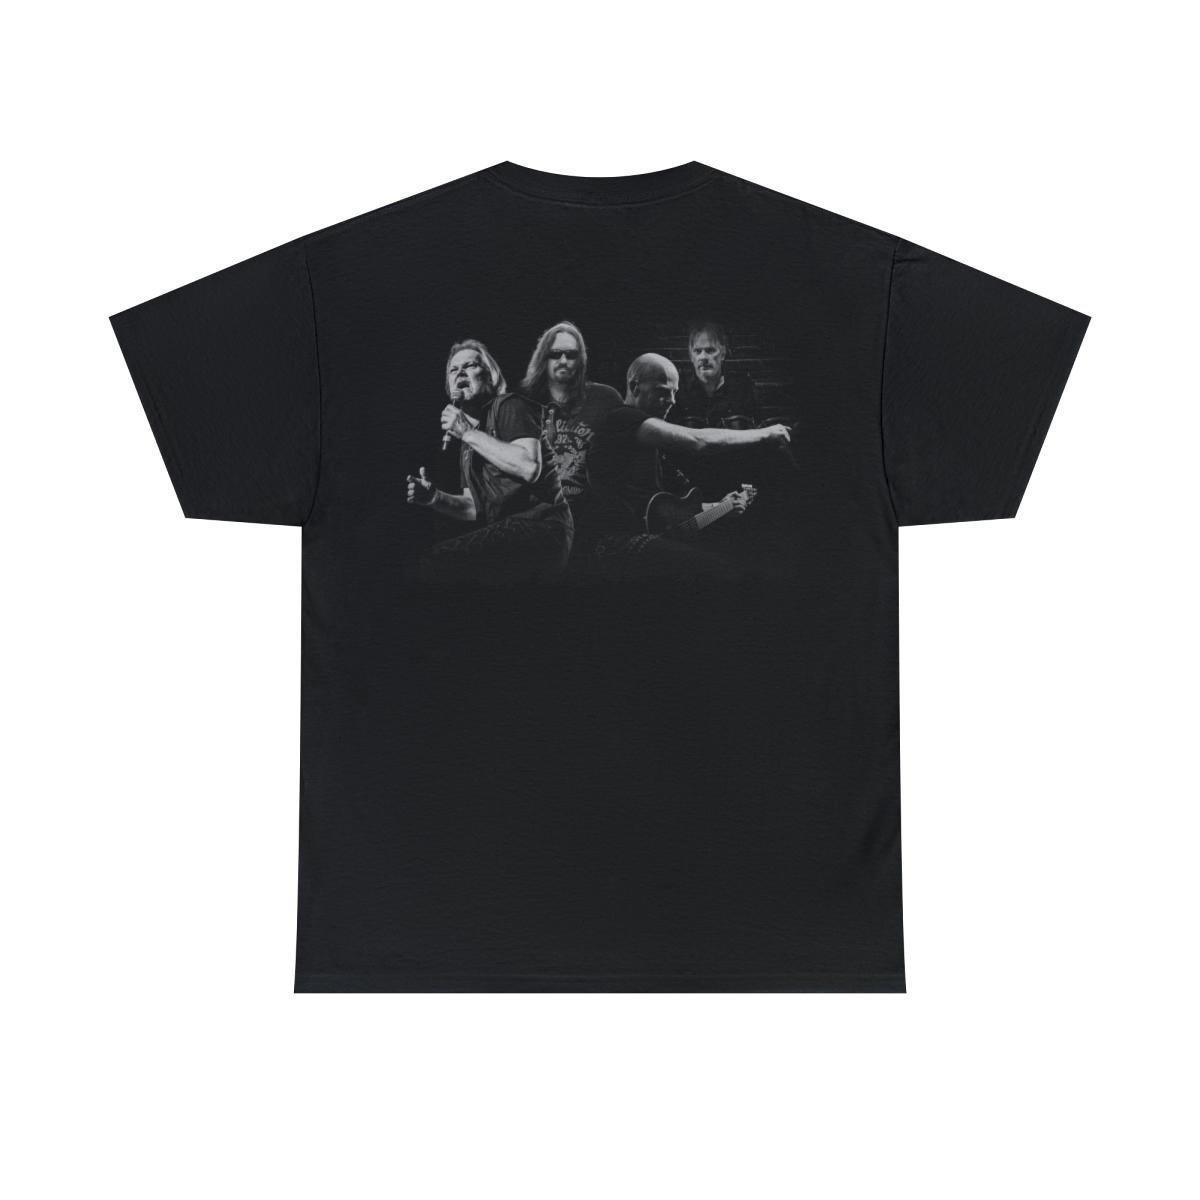 Martin Simson’s Destroyer Of Death – Master Of All Short Sleeve Tshirt (2-Sided)